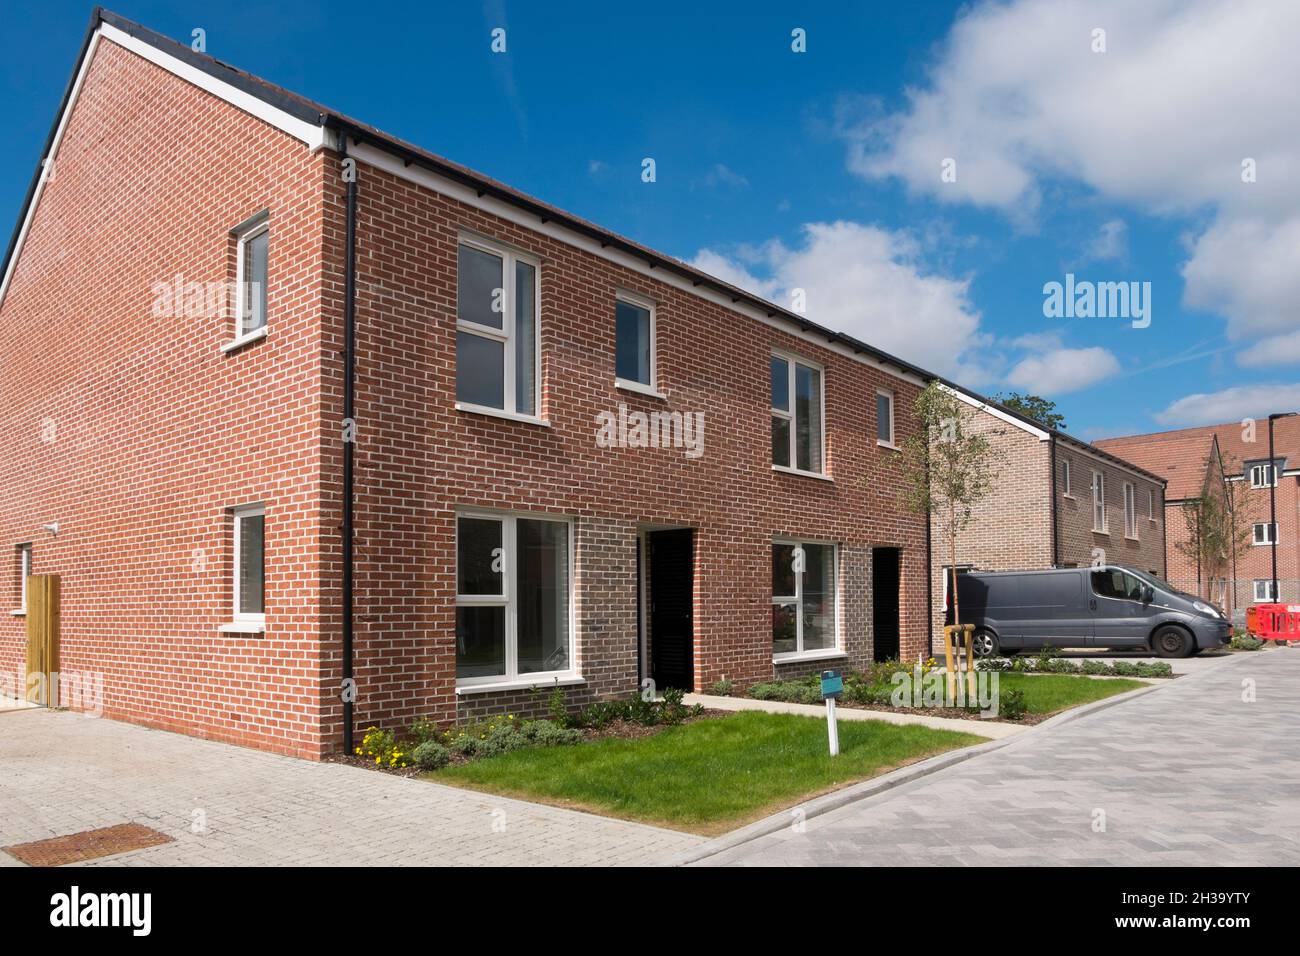 New houses in Joseph Lancaster Lane, the new development in north Chichester, West Sussex, England, UK. Stock Photo